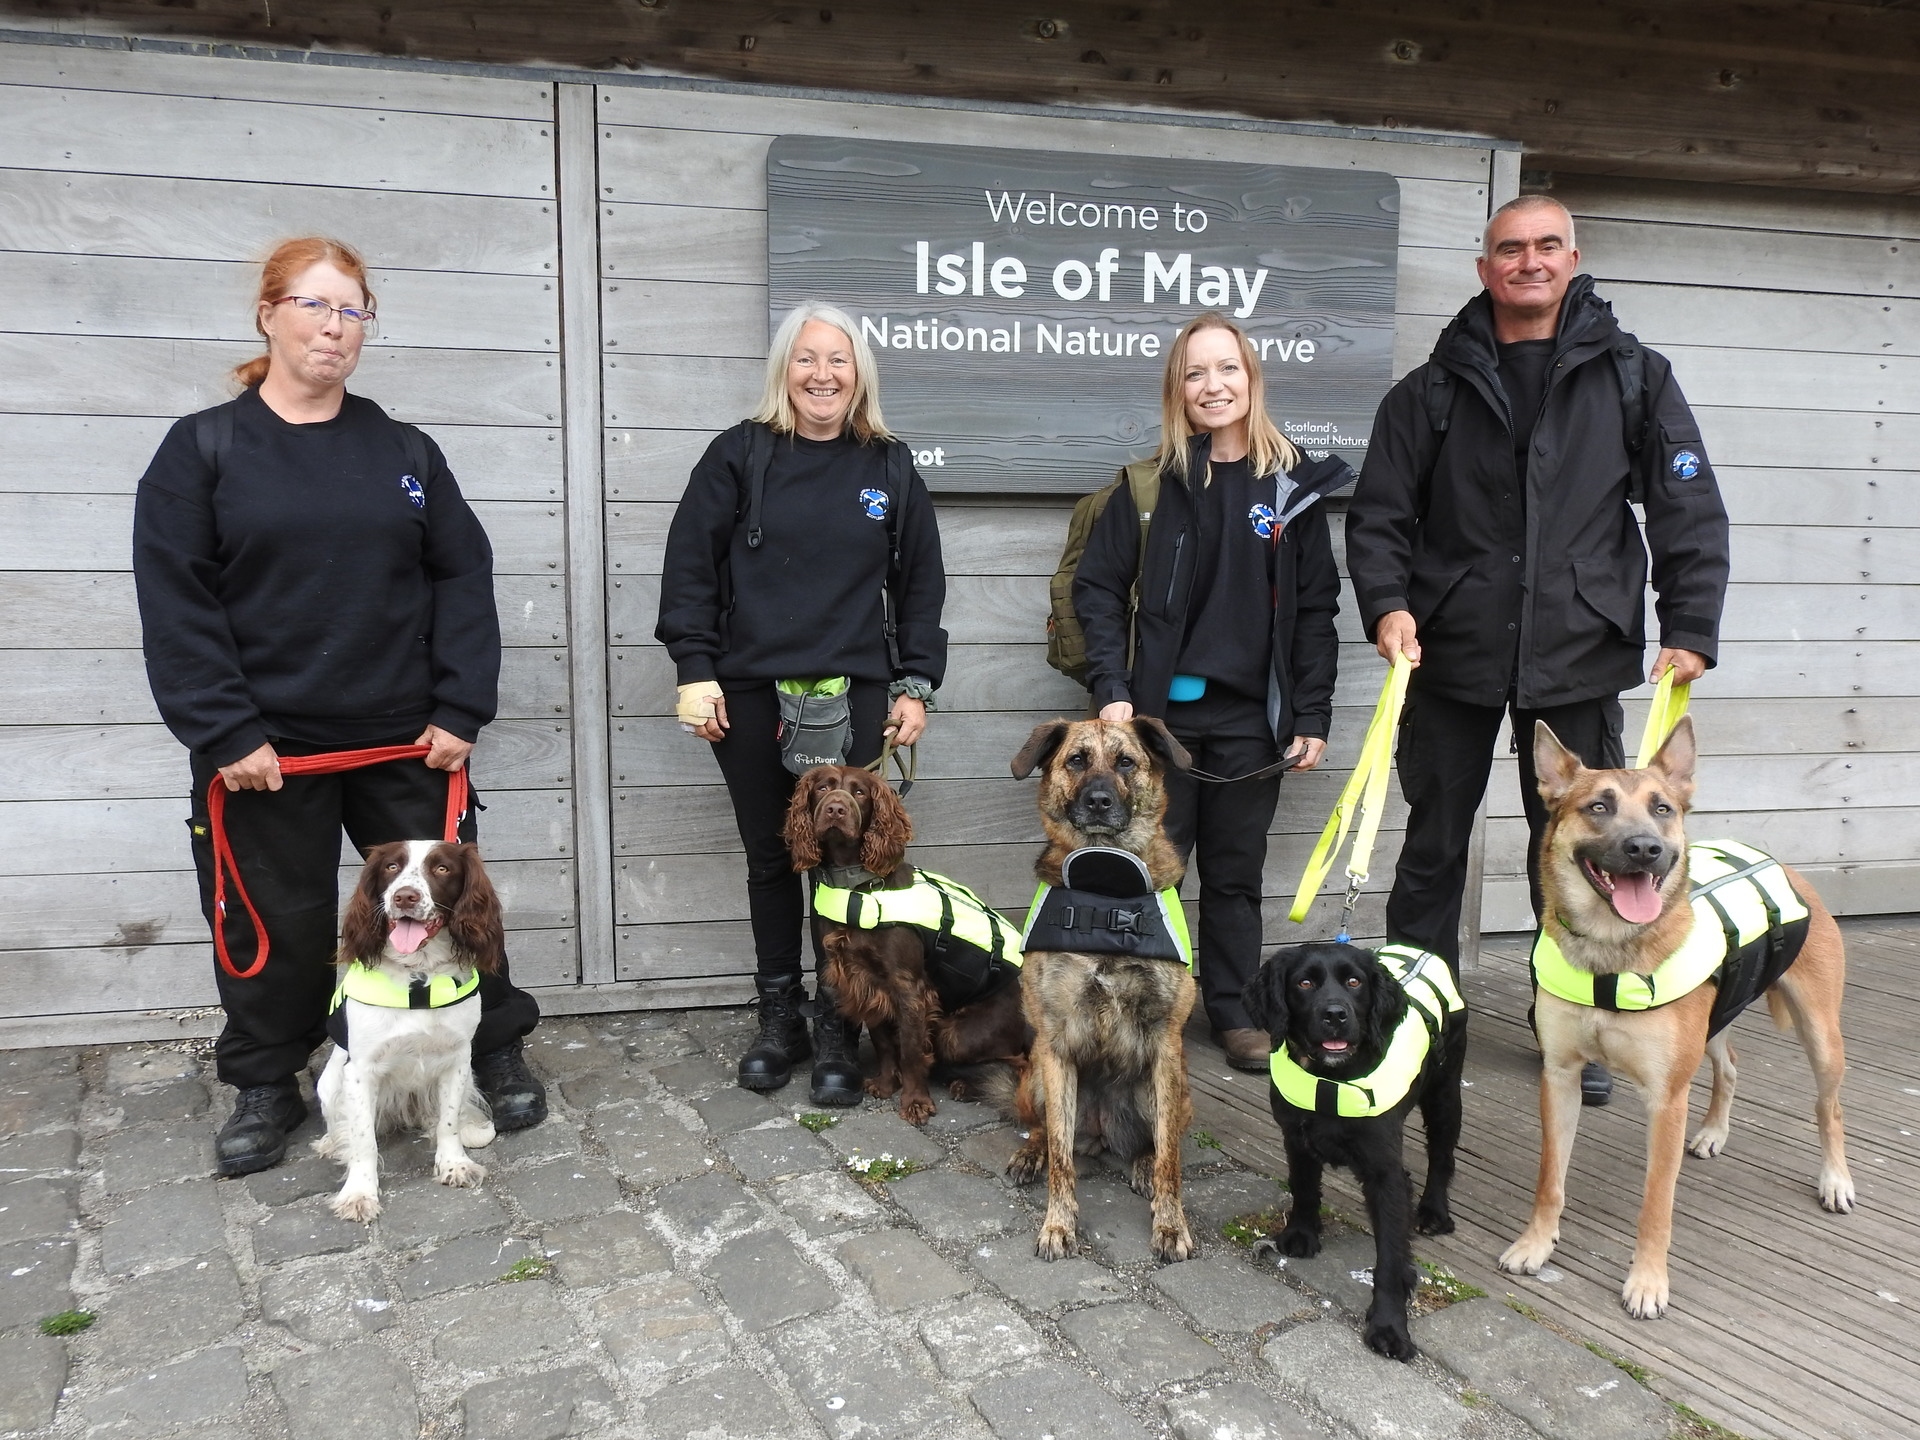 K9 staff with sniffer dogs, from left to right - Lyn with Pyper, Lorriane with Nelson, Lucy with Esmay, and Simon with Molly and Storm. 